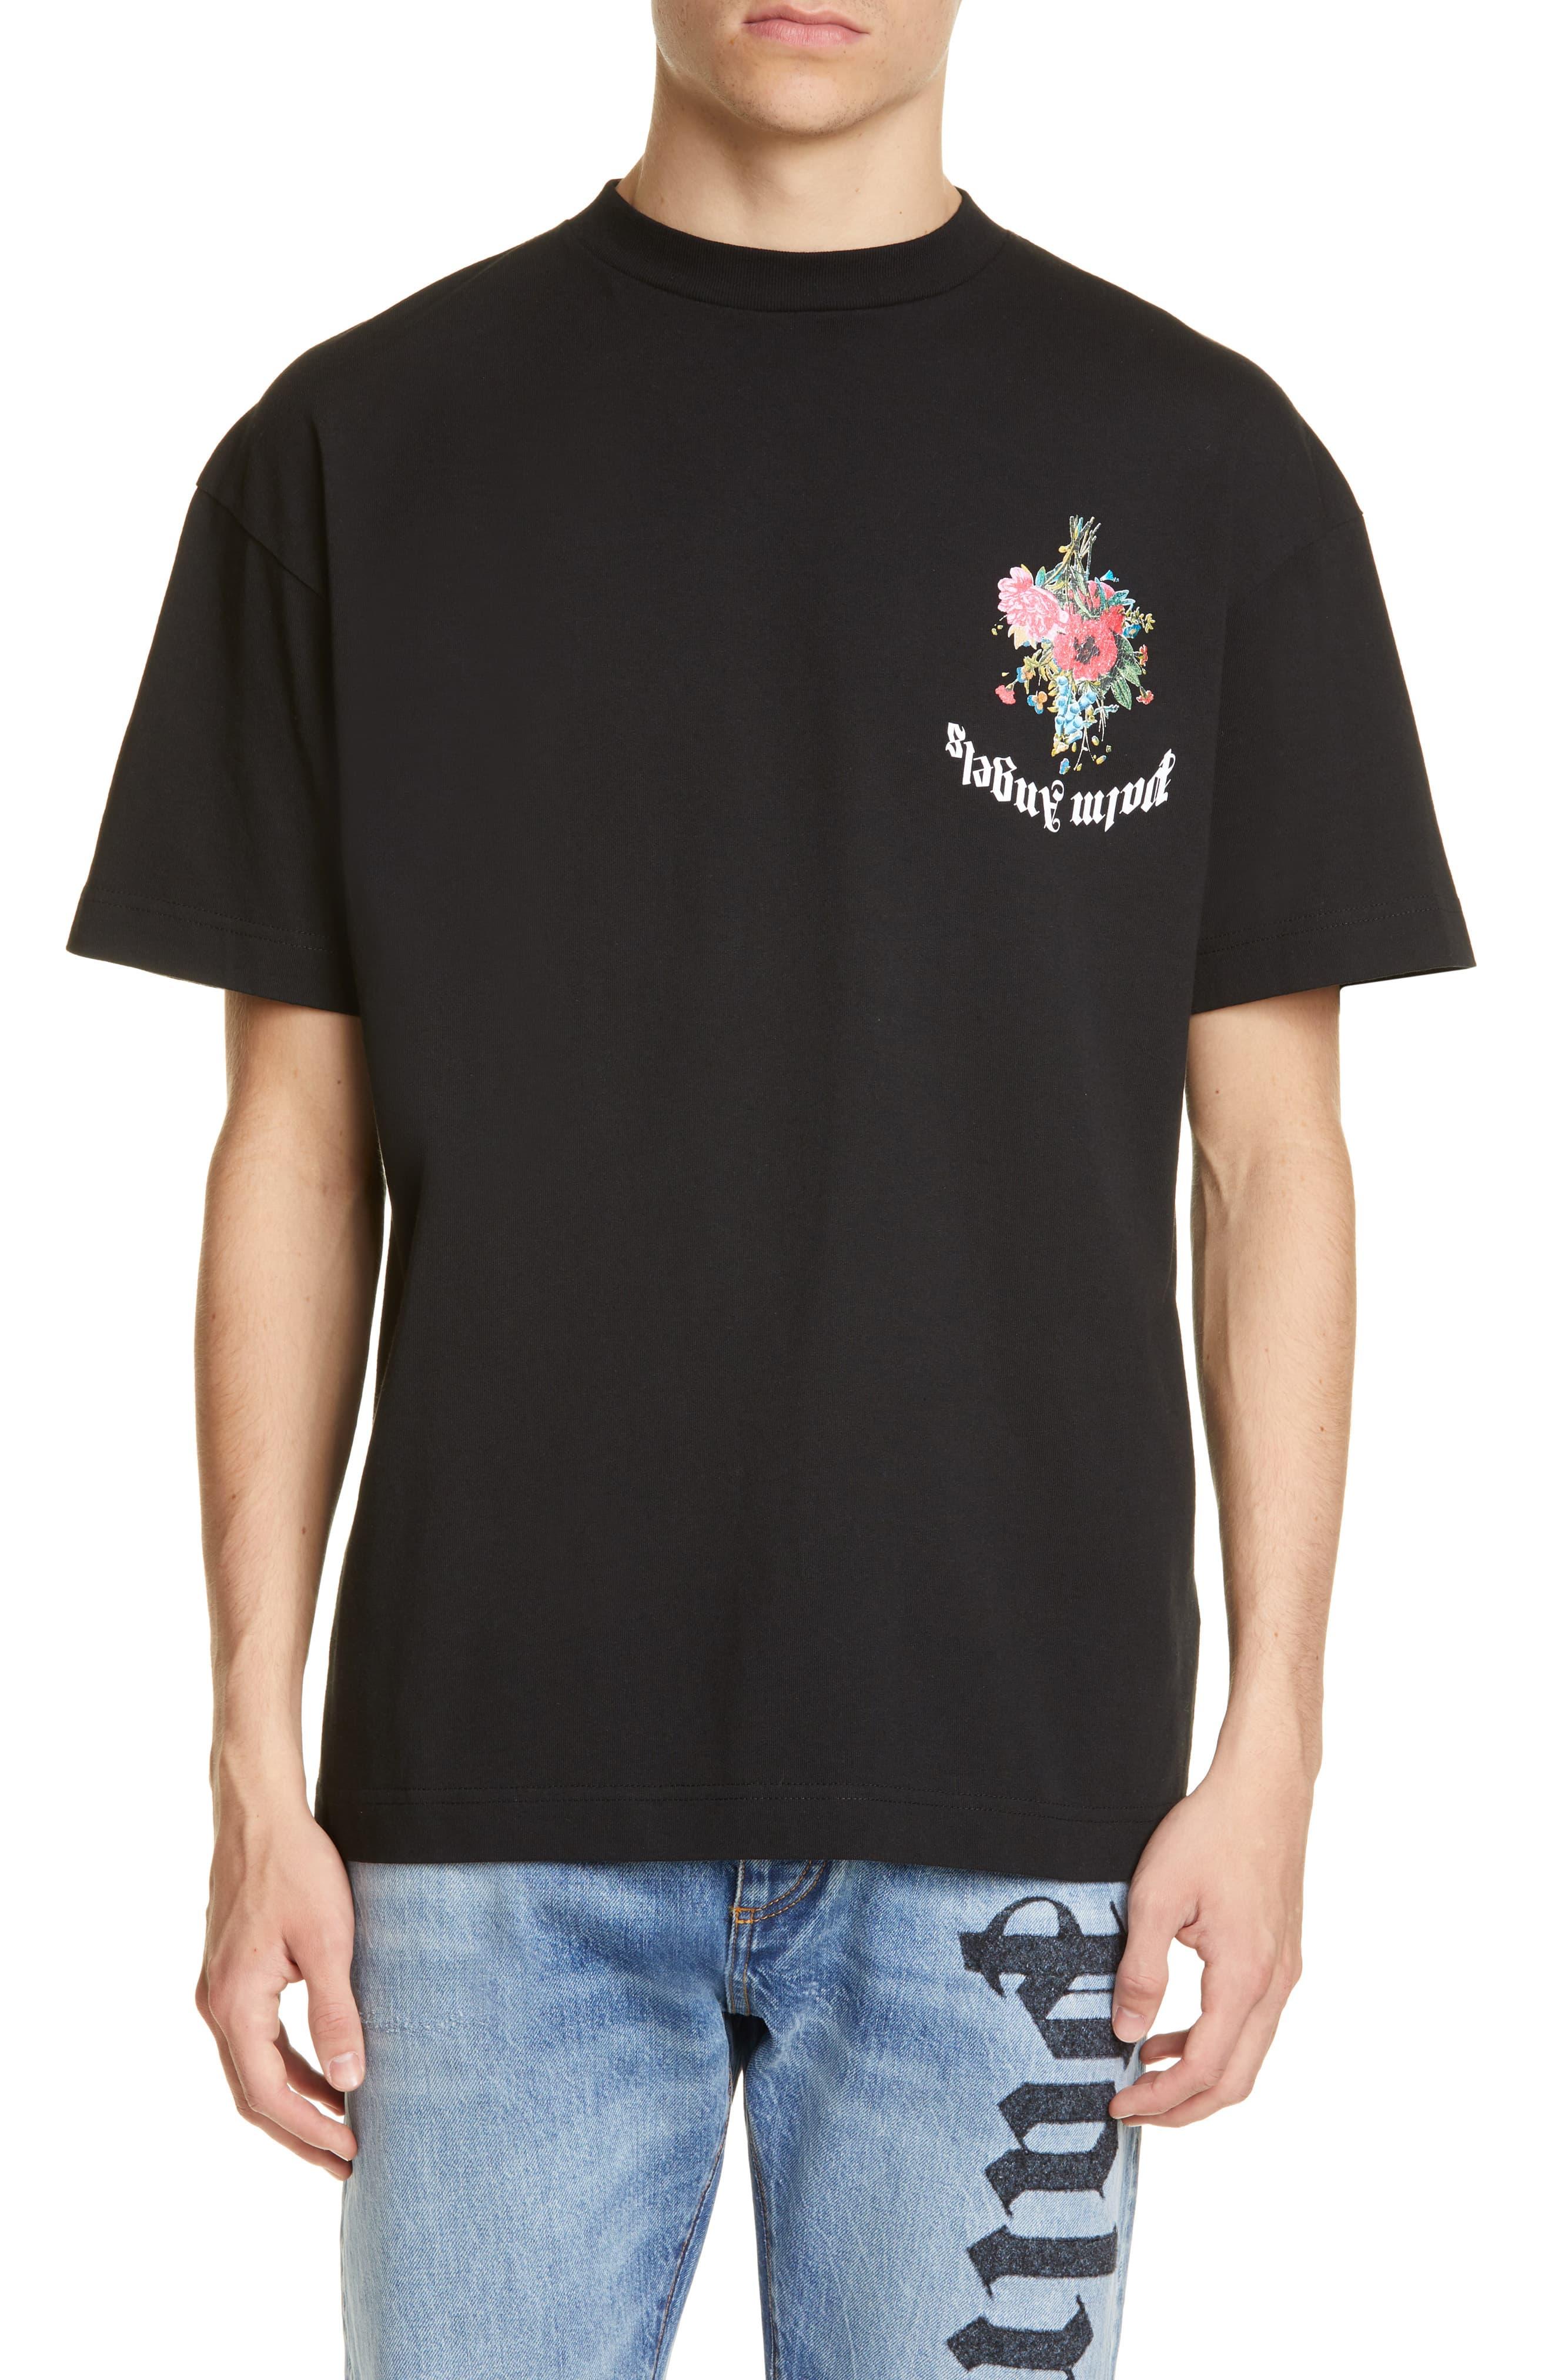 Palm Angels Flowers Graphic T-shirt in Black for Men - Lyst